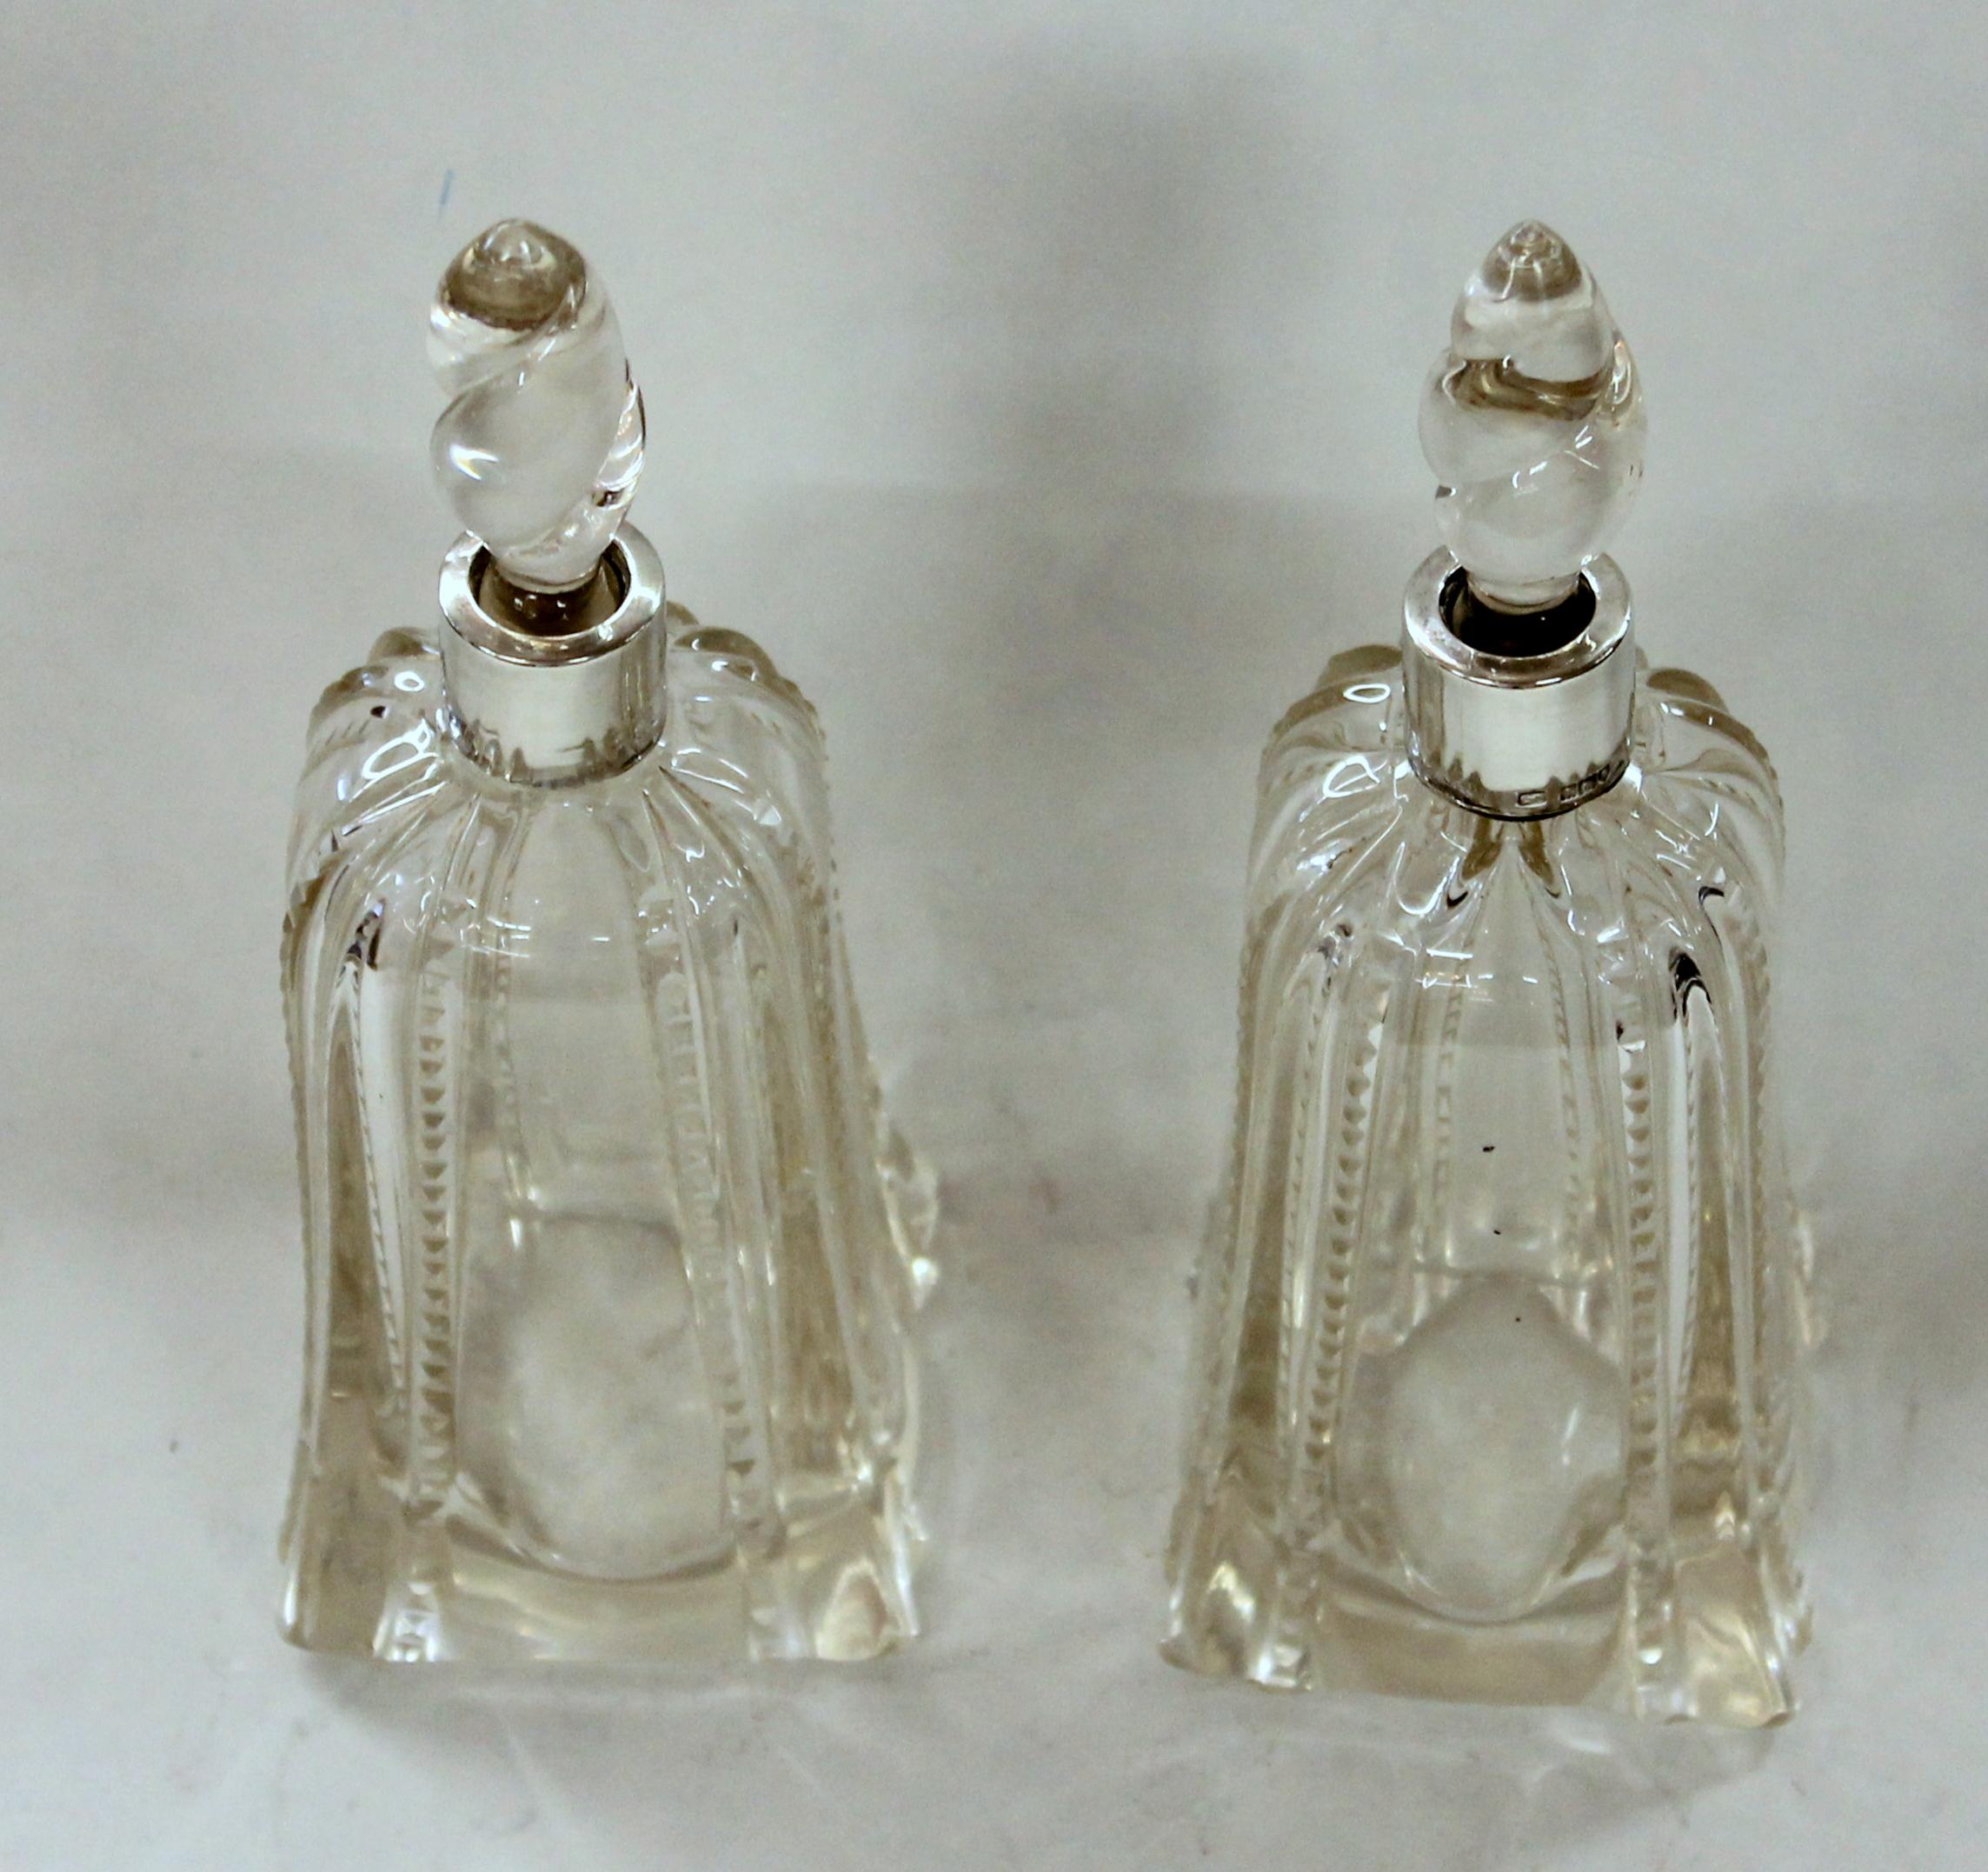 Antique English hallmarked sterling collared and hand-cut crystal scent or perfume bottles.
Hallmarks visible but worn and illegible. Warranted English hallmarked sterling collars and English cut crystal. Superb spiral shaped stoppers.
 